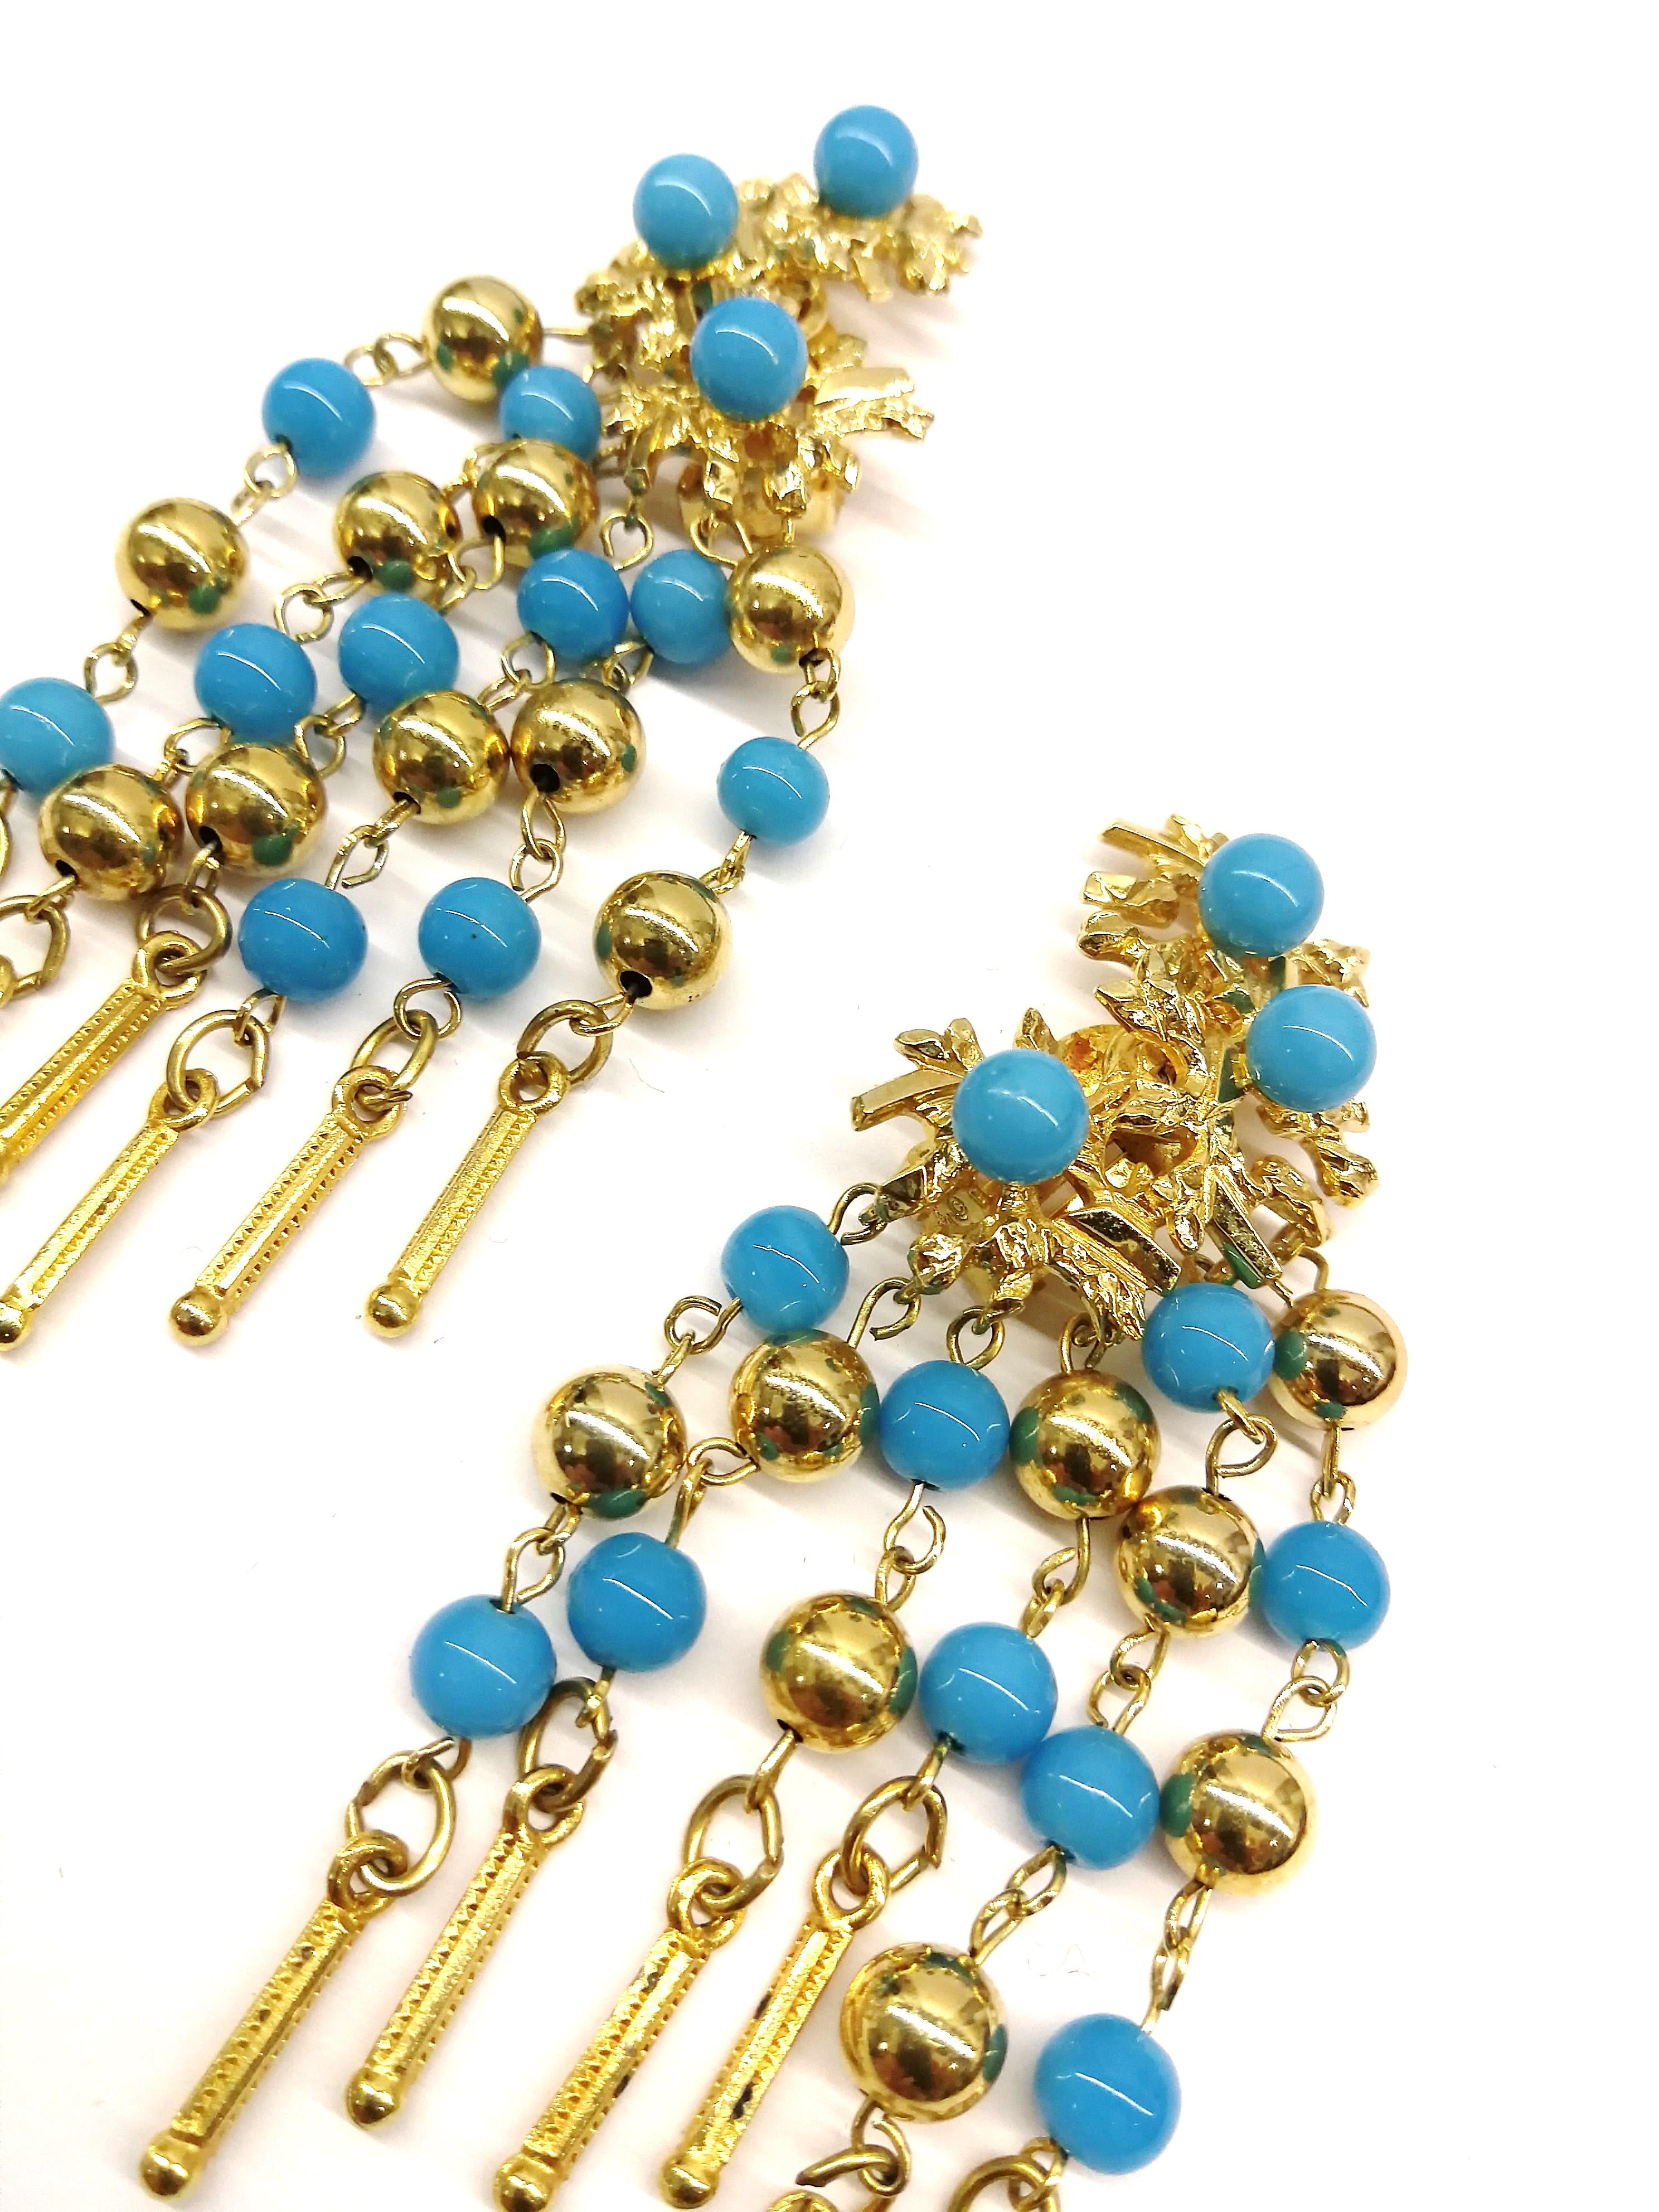 Women's or Men's Long gilt metal and turquoise glass bead fringed earrings, Christian Dior, 1968